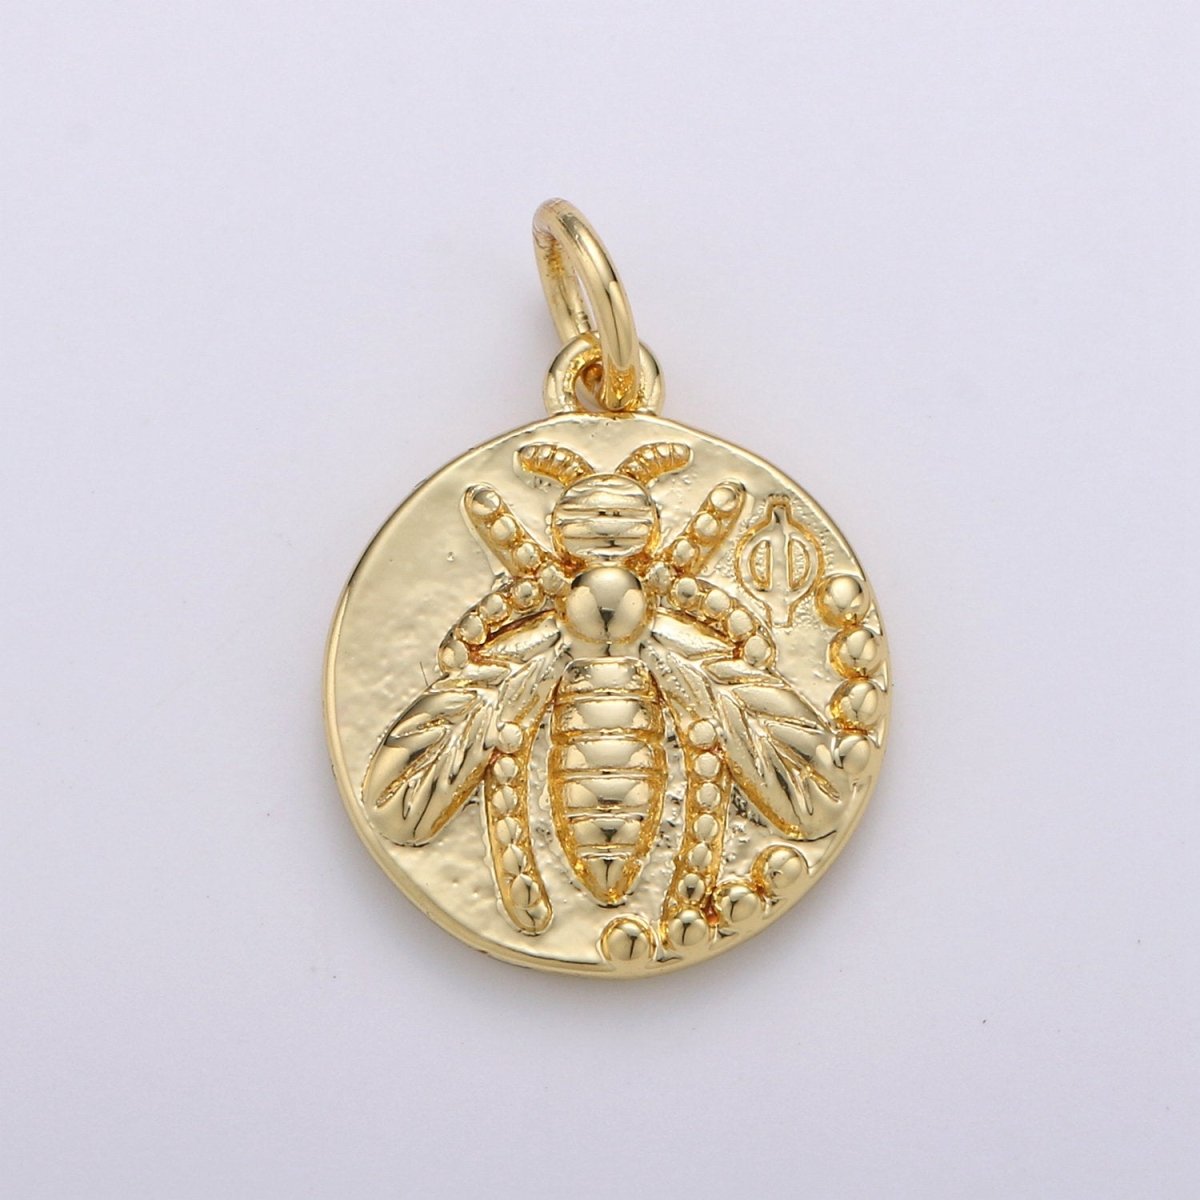 OS 24K Gold Filled Bee Charm- Fly Charm Pendant Circle Charm, Round Disc, Gold Coin QueenBee Charm for Necklace Bracelet Earring Animal Insect D-397 - DLUXCA